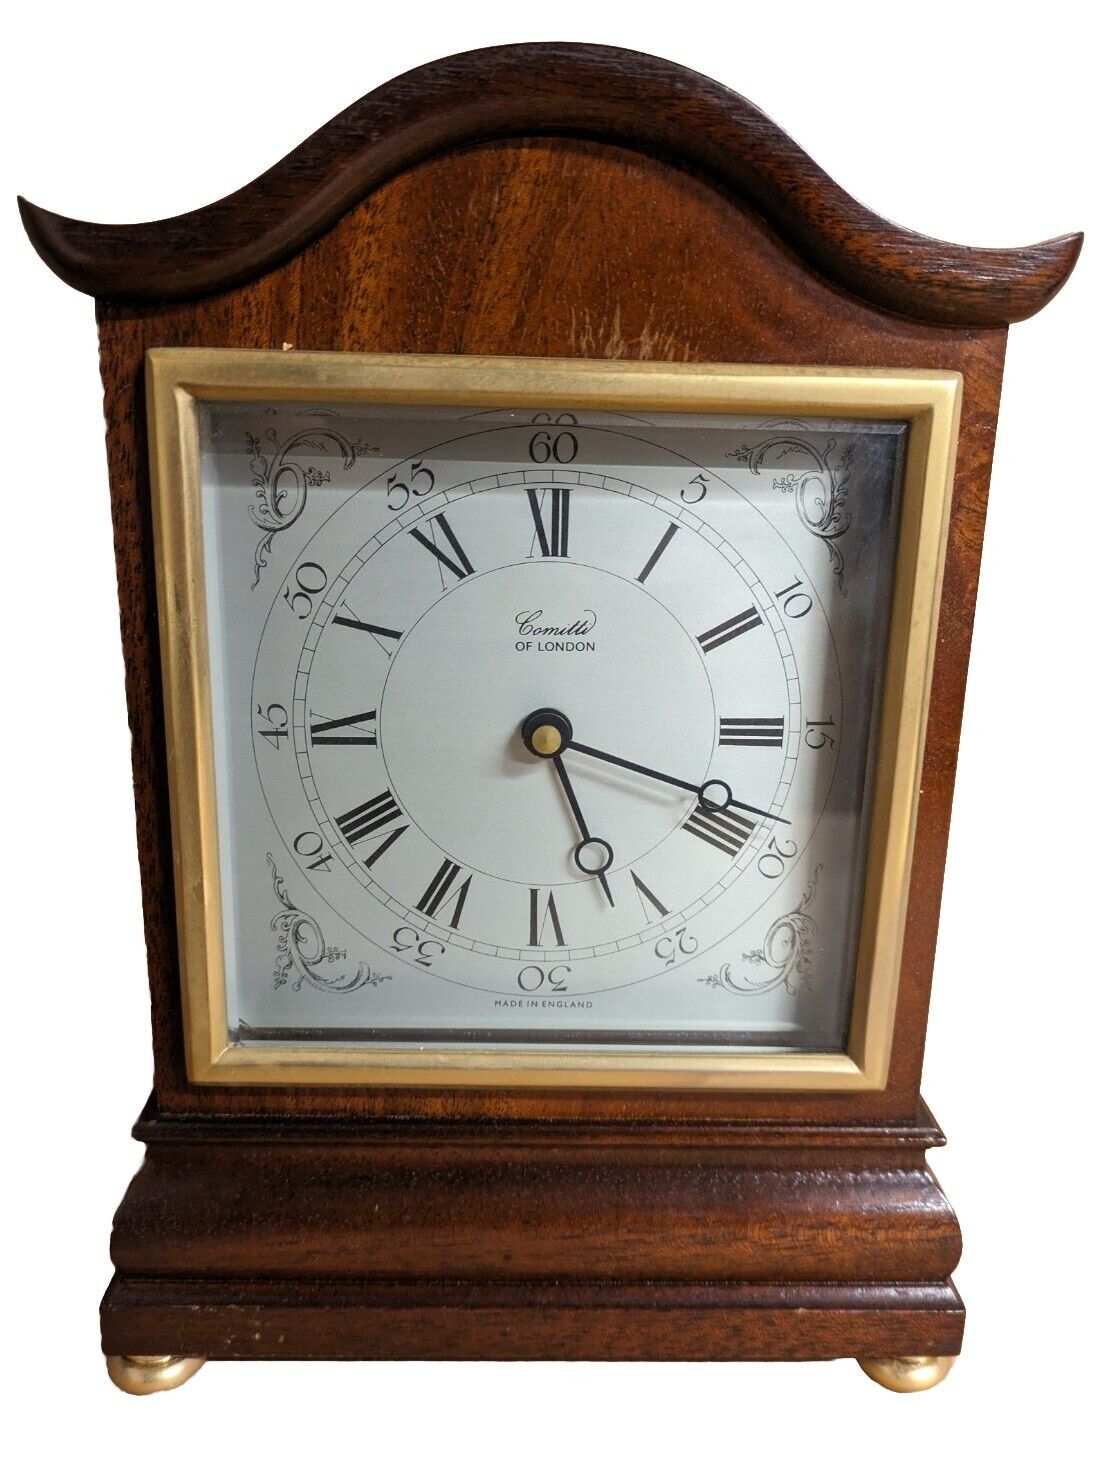 Vintage Comitti of London Mantel Clock in Mahogany Case with Arched Top, Brass